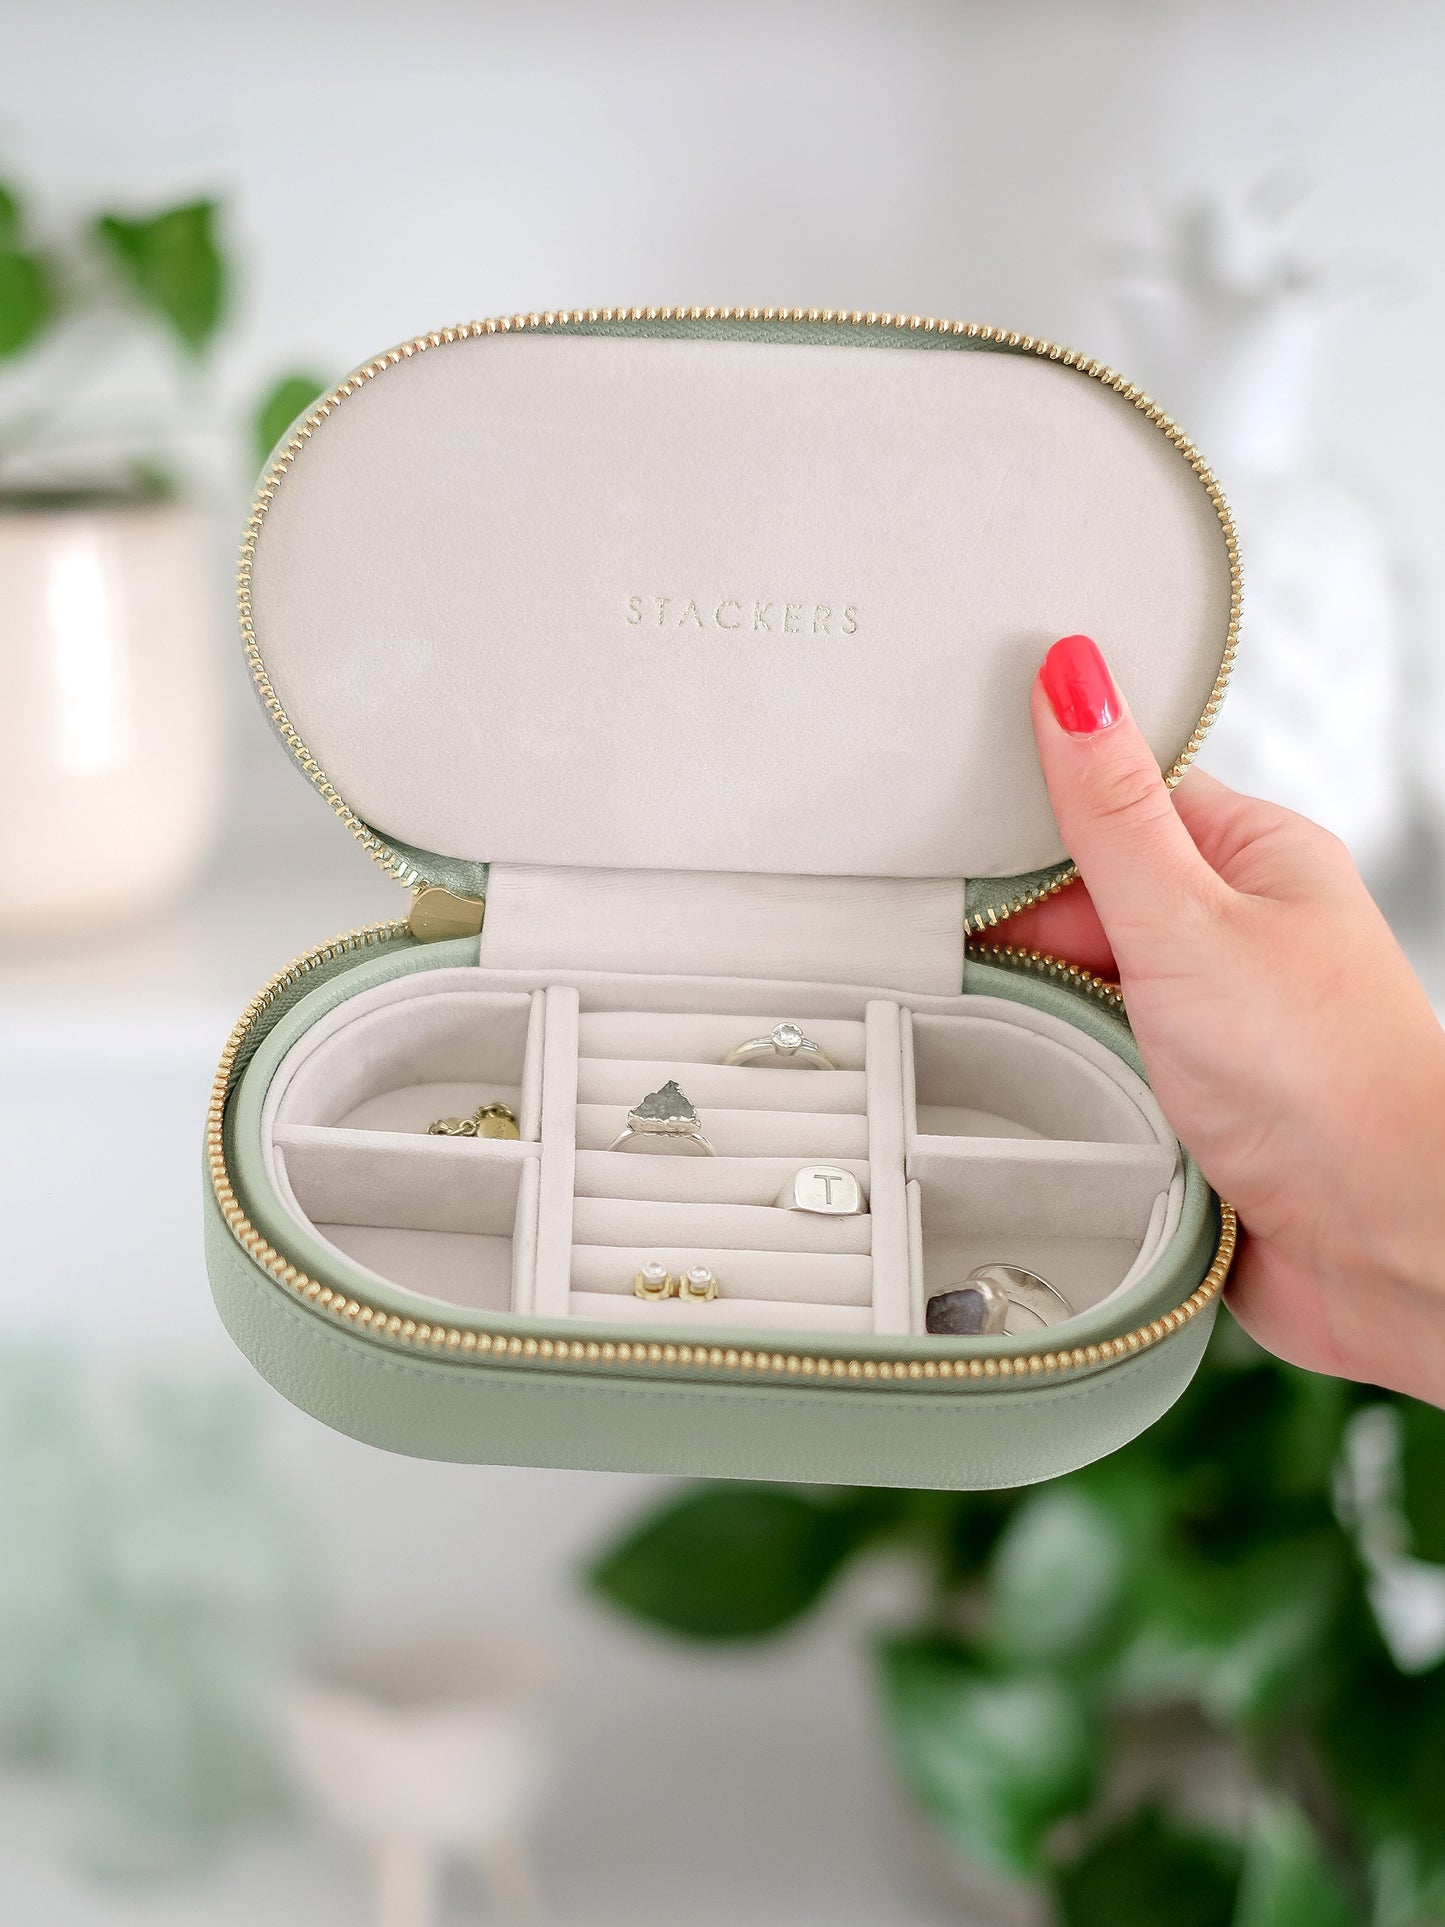 00017222 - Stackers oval zipped travel jewellery box - Sage Green.